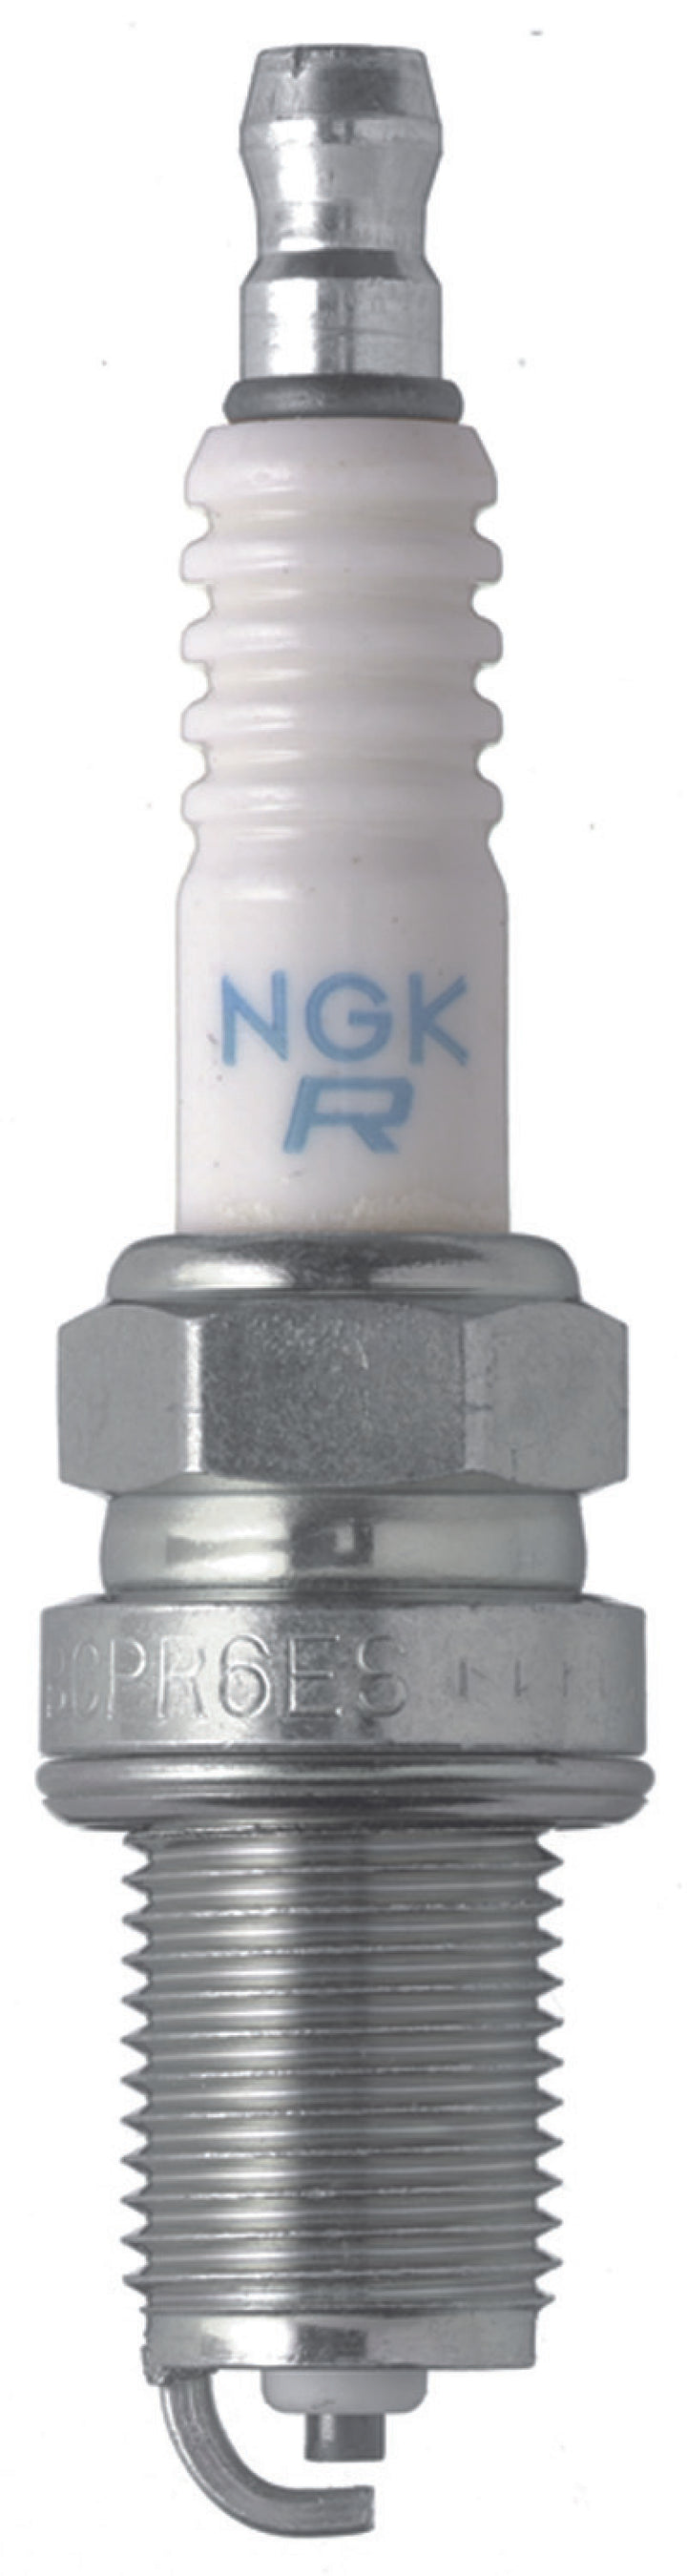 NGK Traditional Spark Plugs Box of 4 (BCPR6ES).